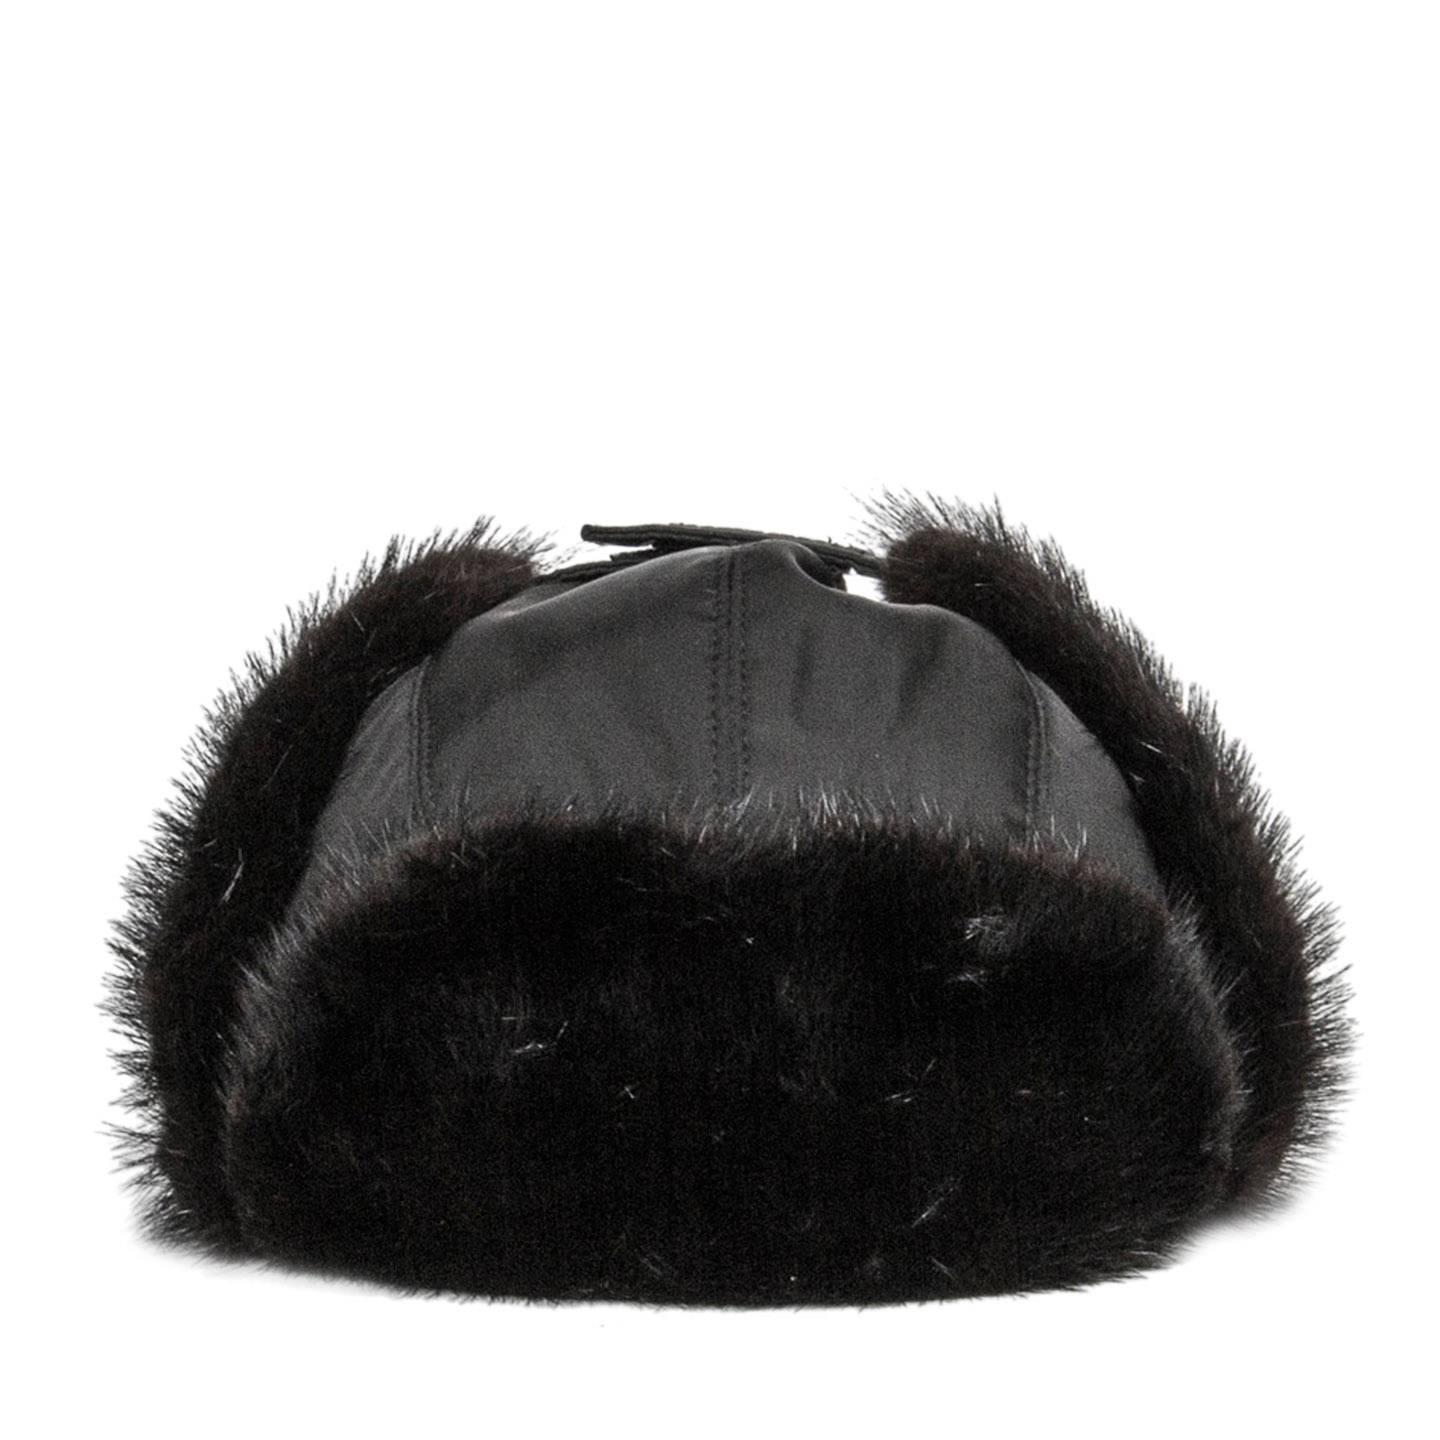 Prada black nylon and mink fur hunters style cap with ear flaps and velcro closure.

Size  M Universal sizing 

Condition  Excellent: worn a few times